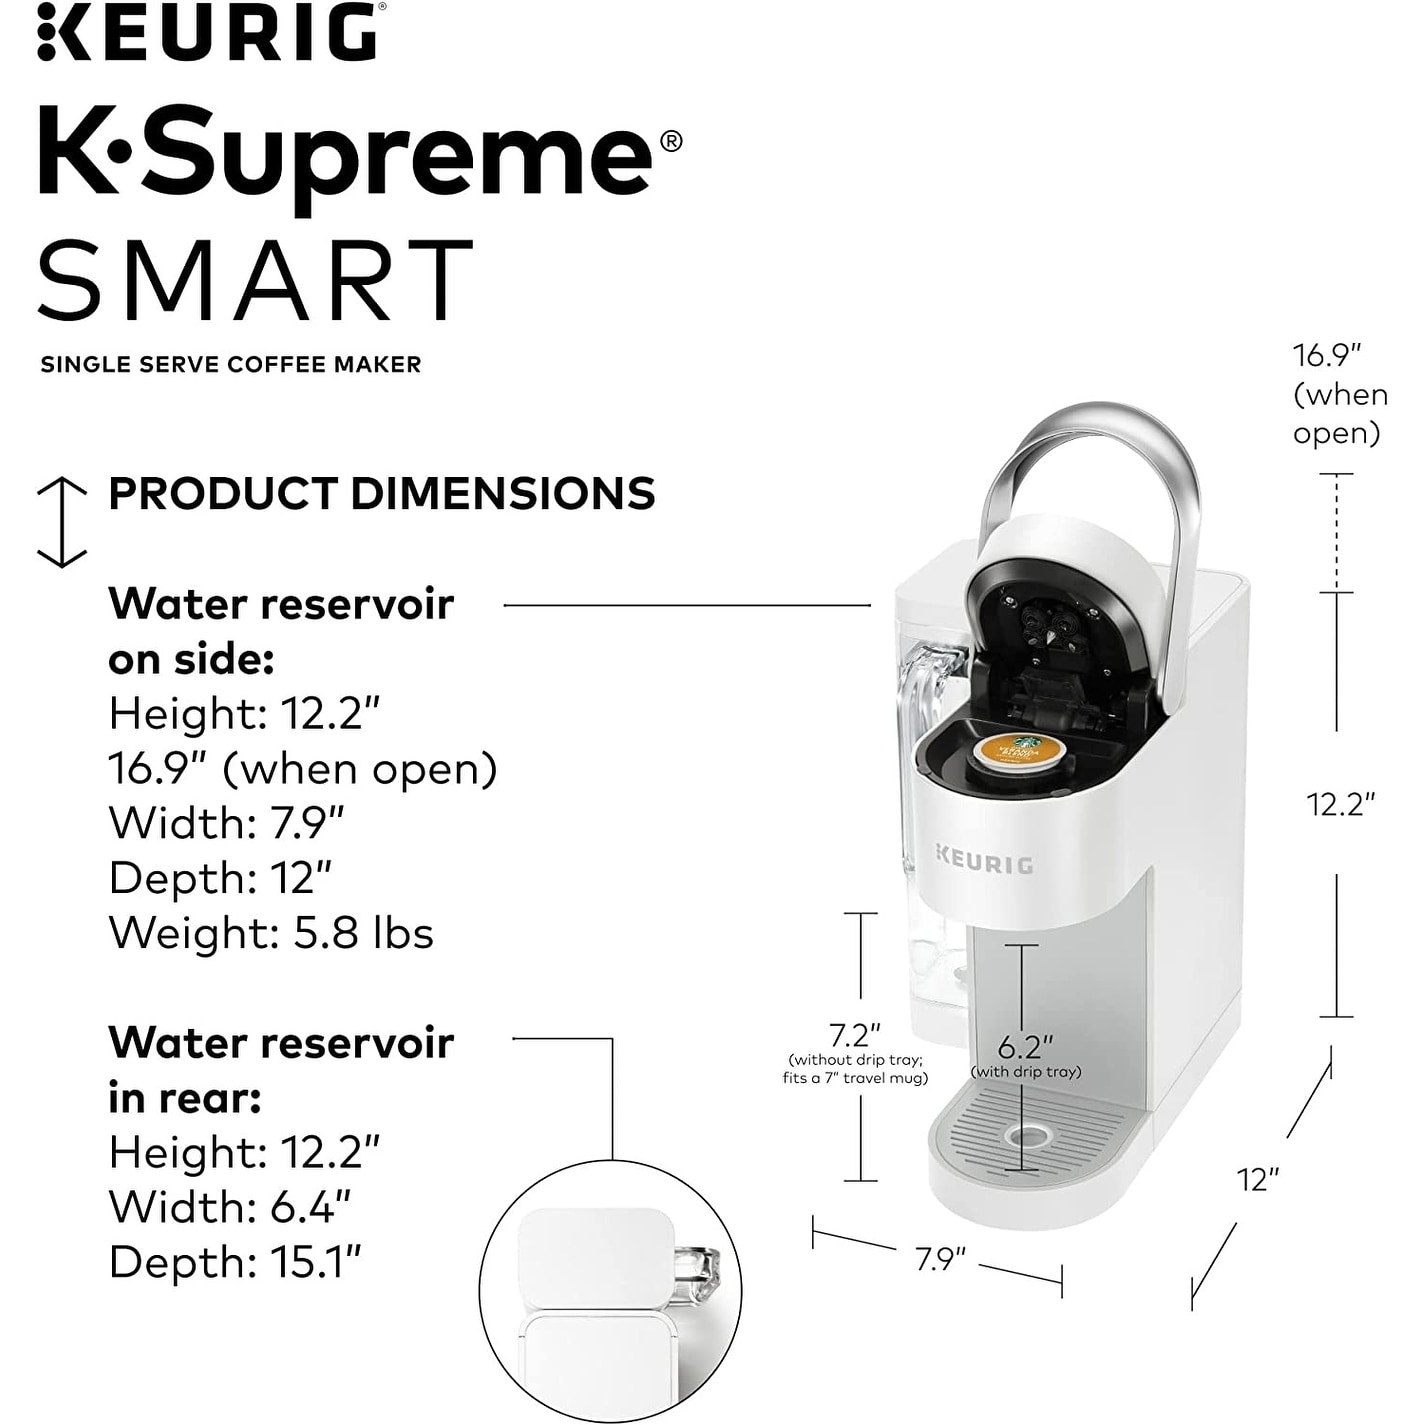 https://ak1.ostkcdn.com/images/products/is/images/direct/84902981e0ee670c8b95f0ed135a2c86060aa1a4/Keurig-K-Supreme-SMART-Single-Serve-Coffee-Maker.jpg